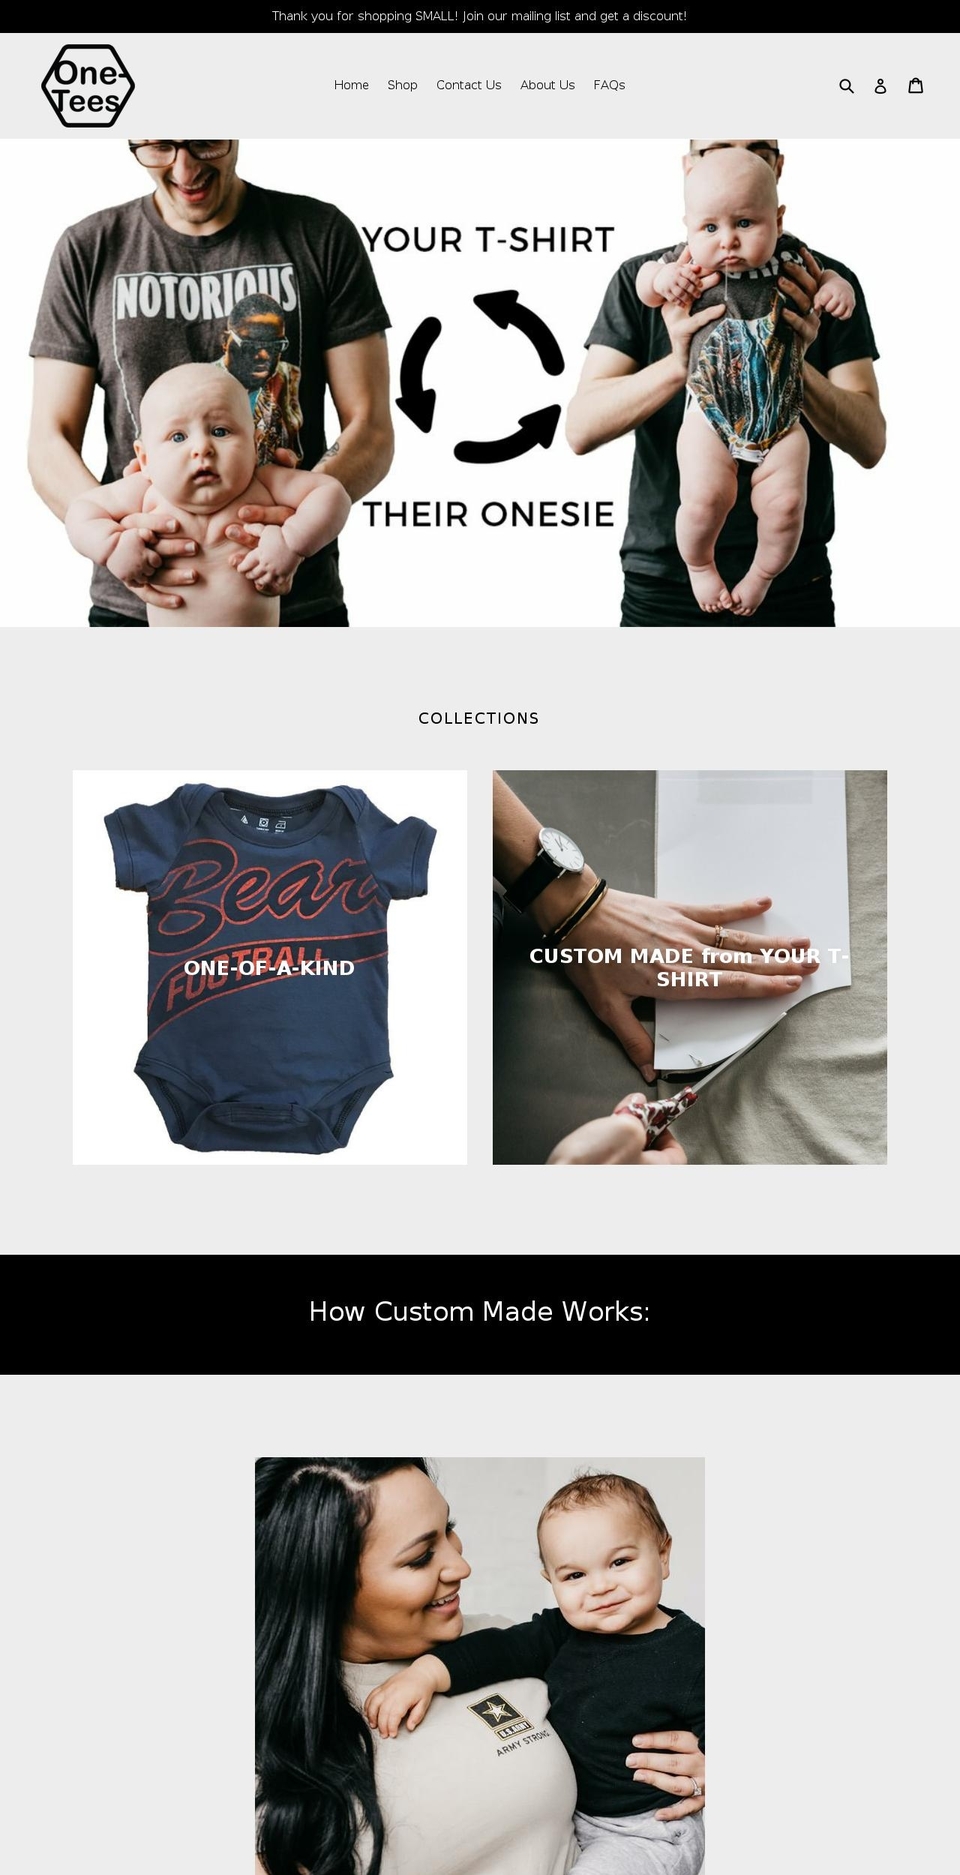 Snow Shopify theme site example one-tees.com